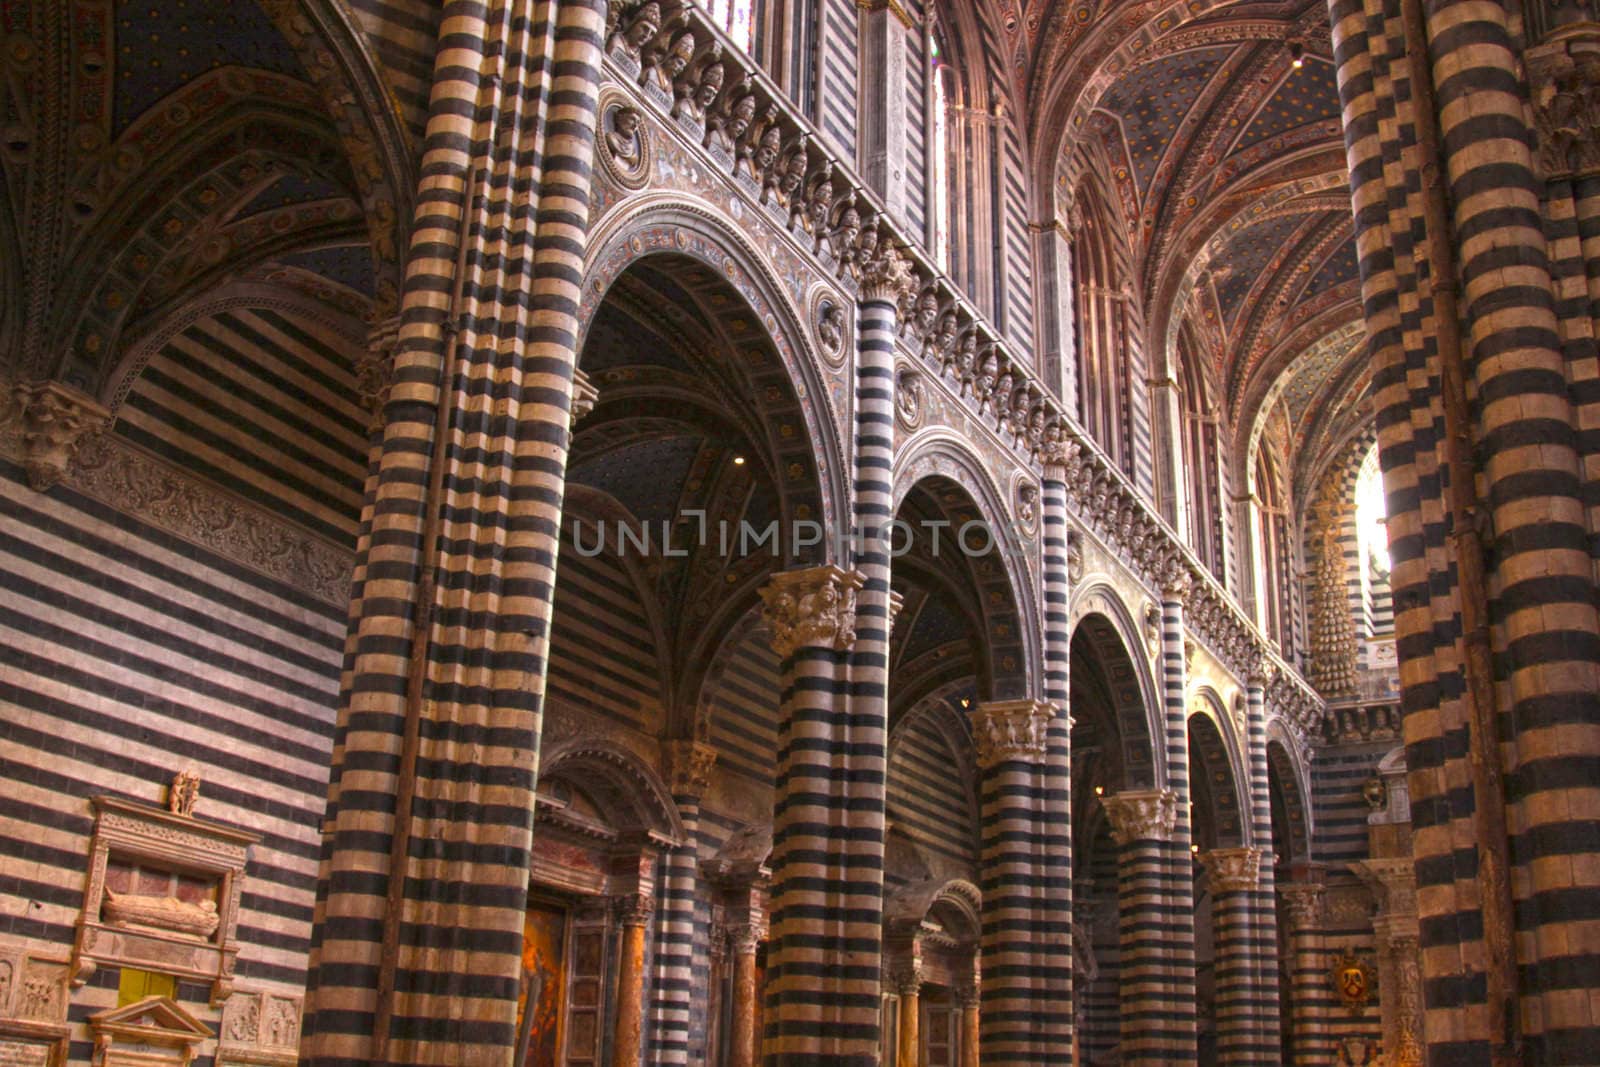 The stunning stripped interior of the cathedral in Siena, Italy.